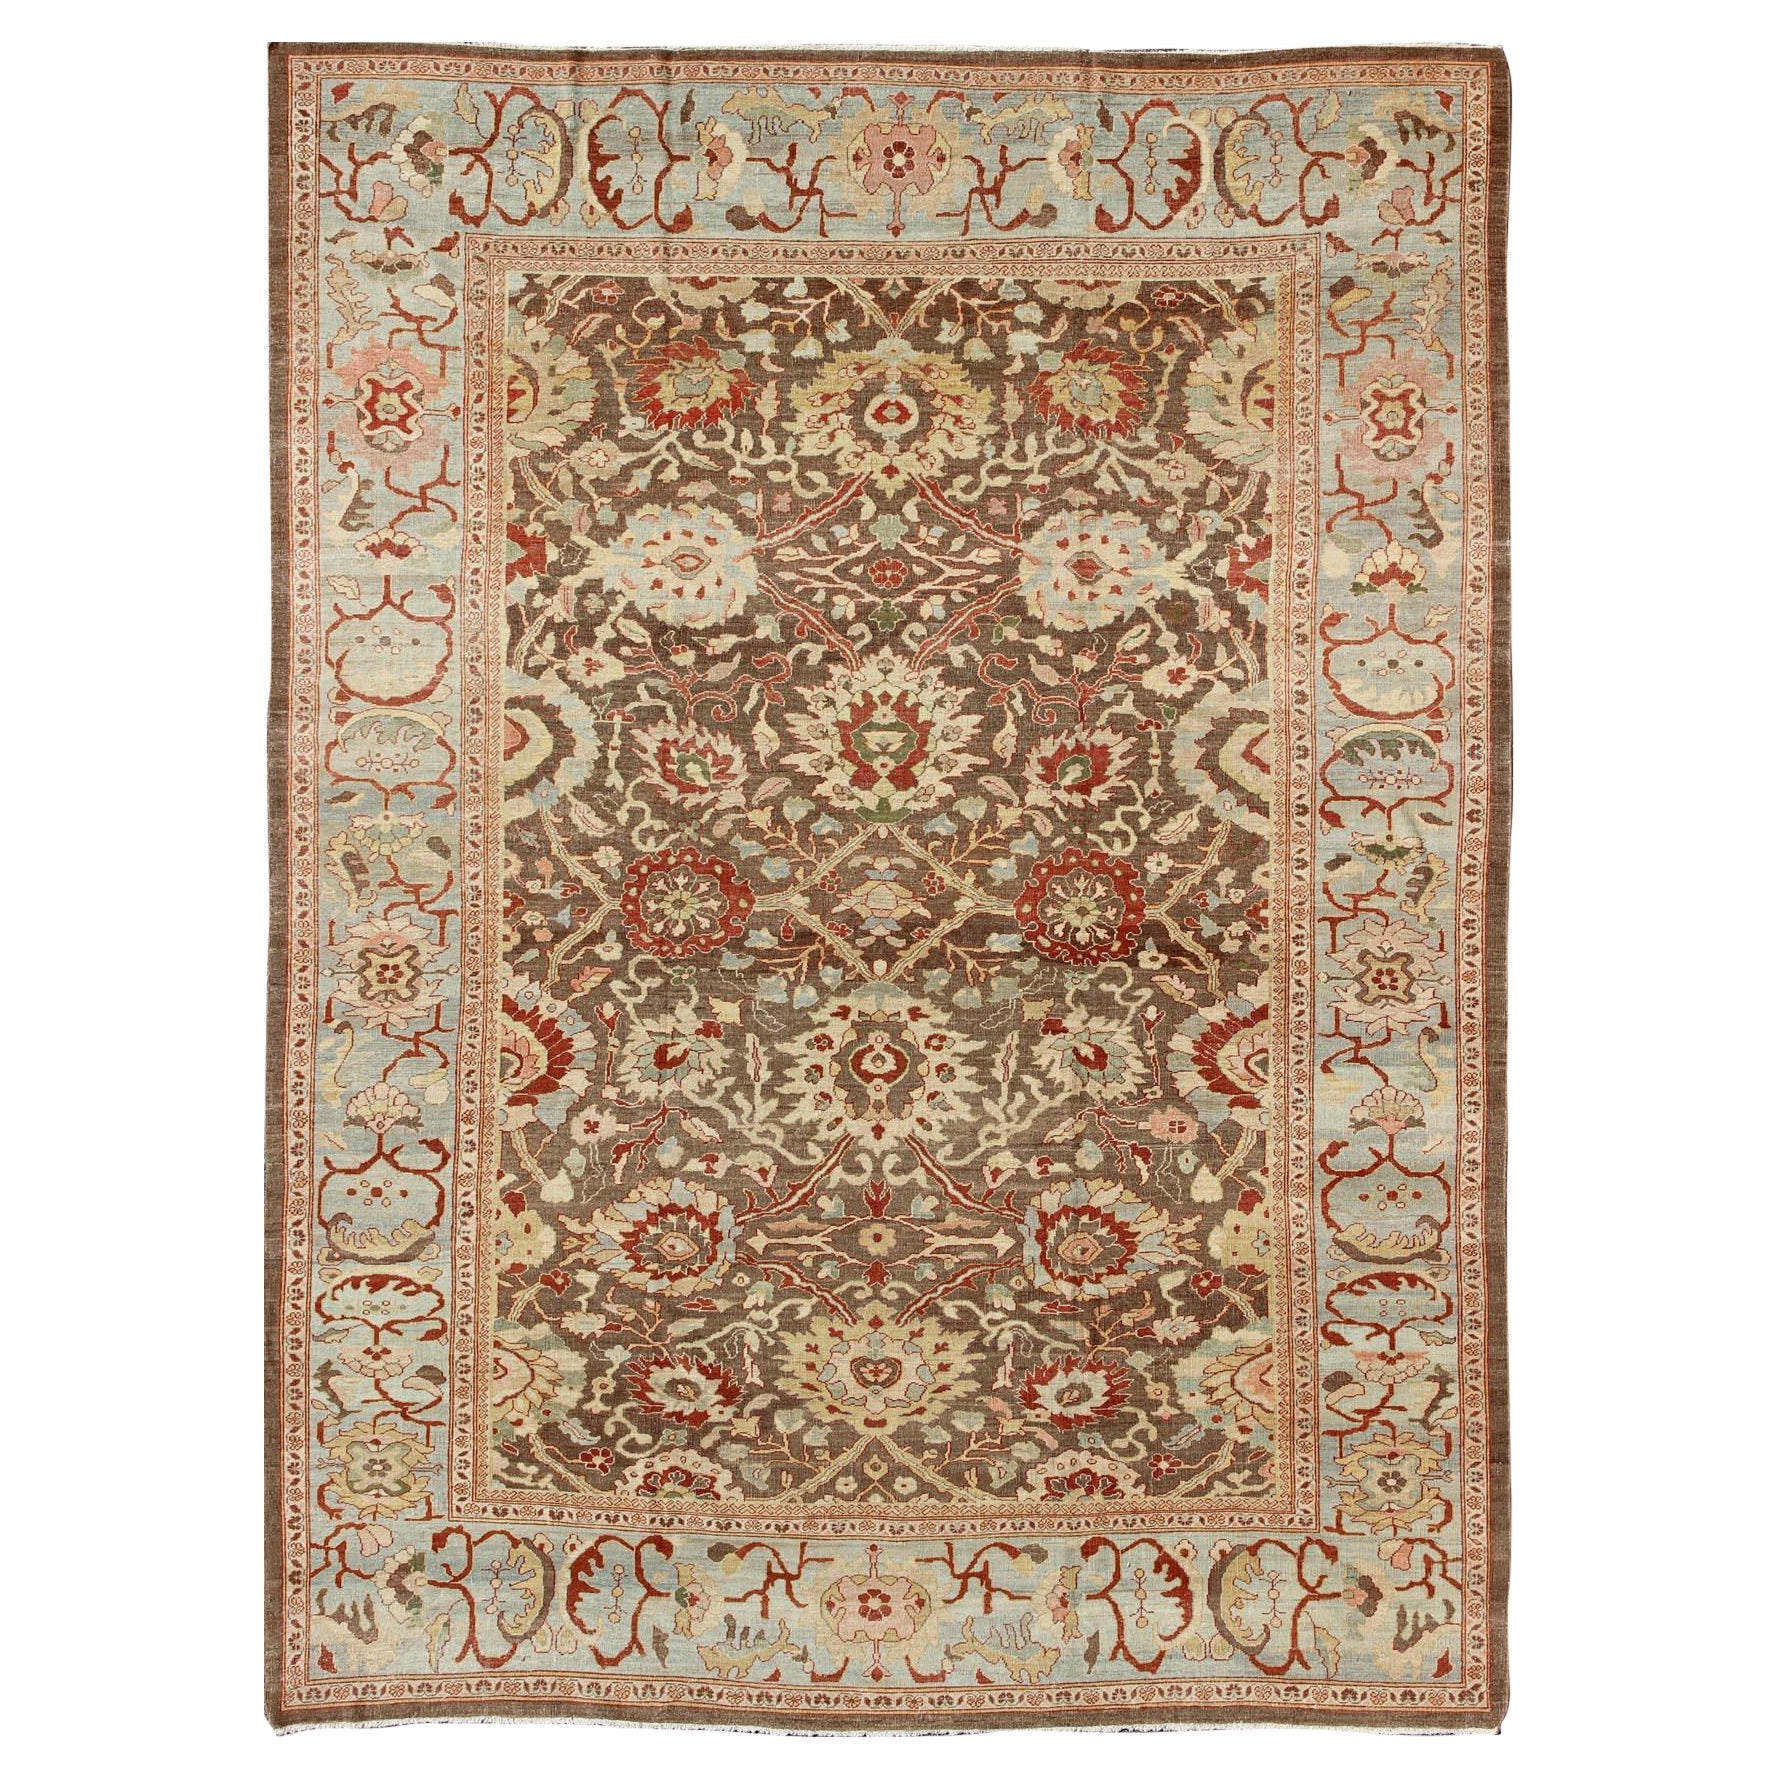 Large Vintage Persian Sultanabad Rug with All-Over Design in Brown Background